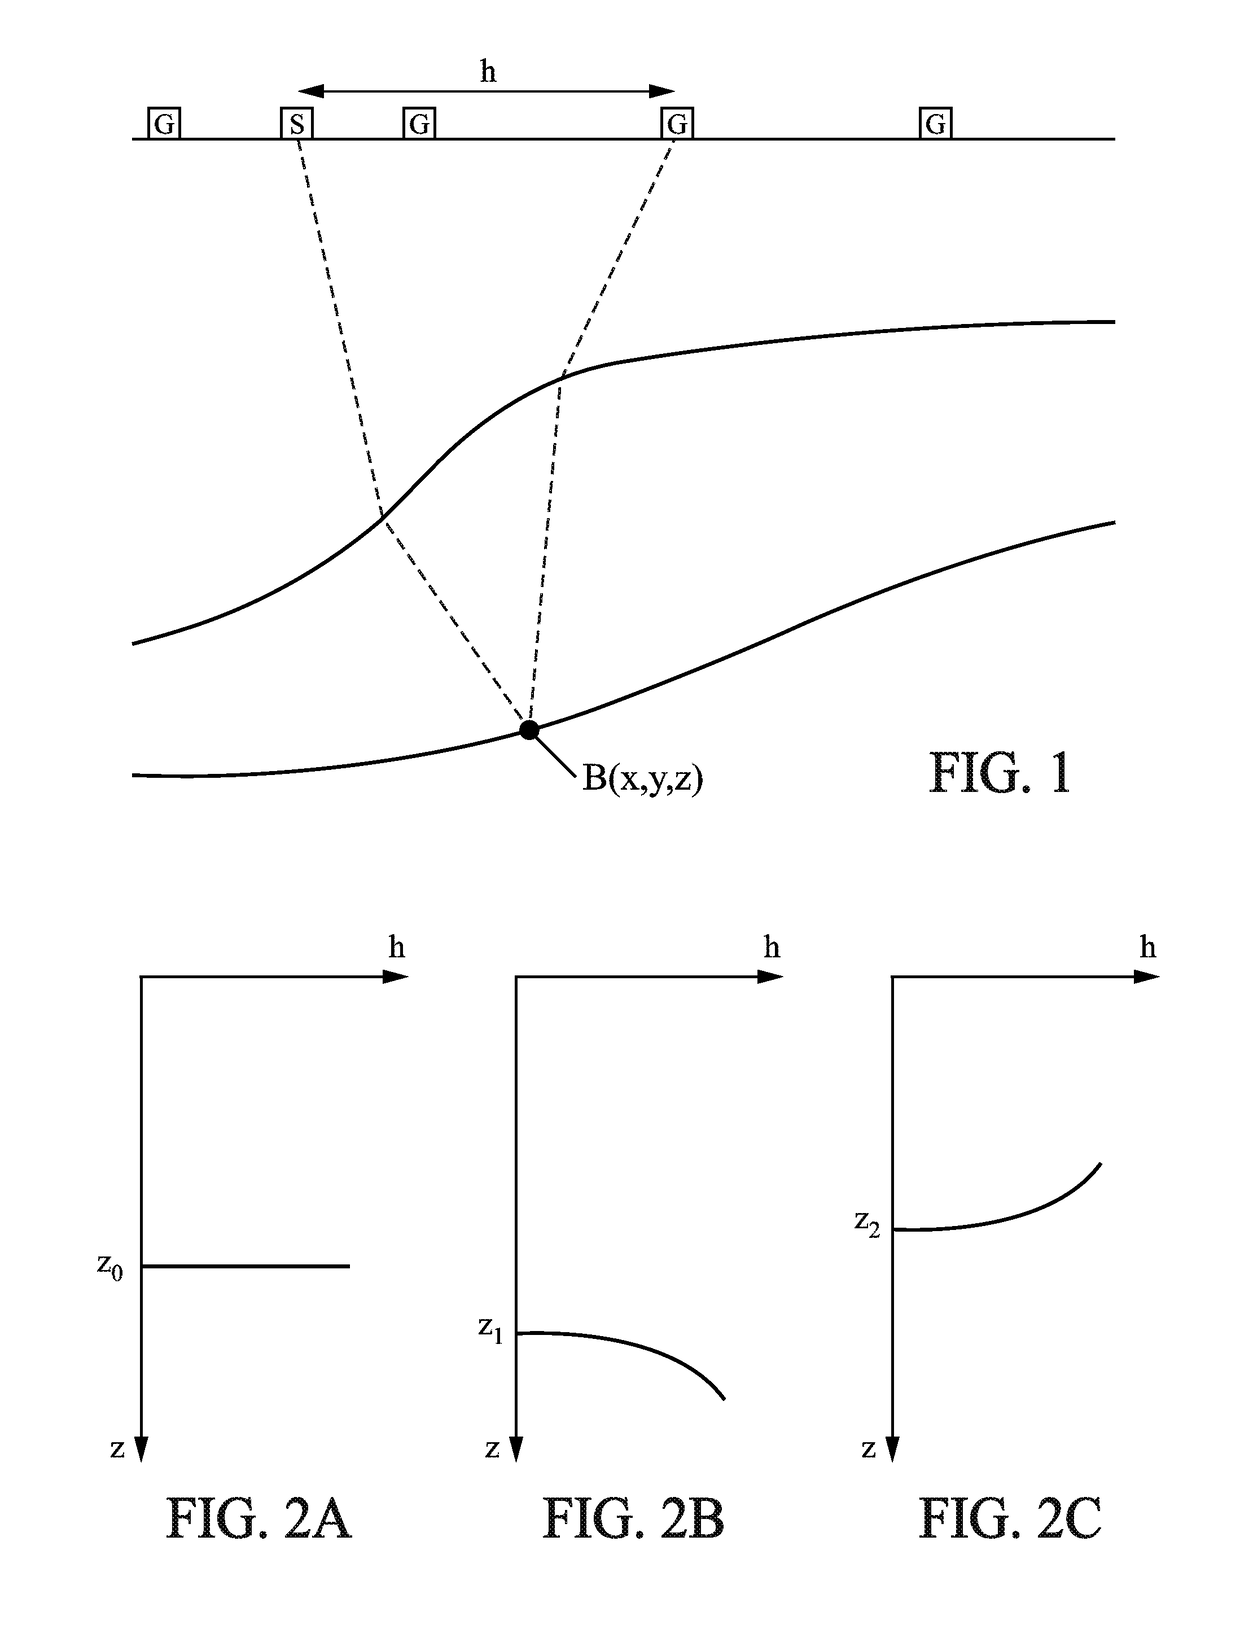 Method of processing seismic data by providing surface offset common image gathers